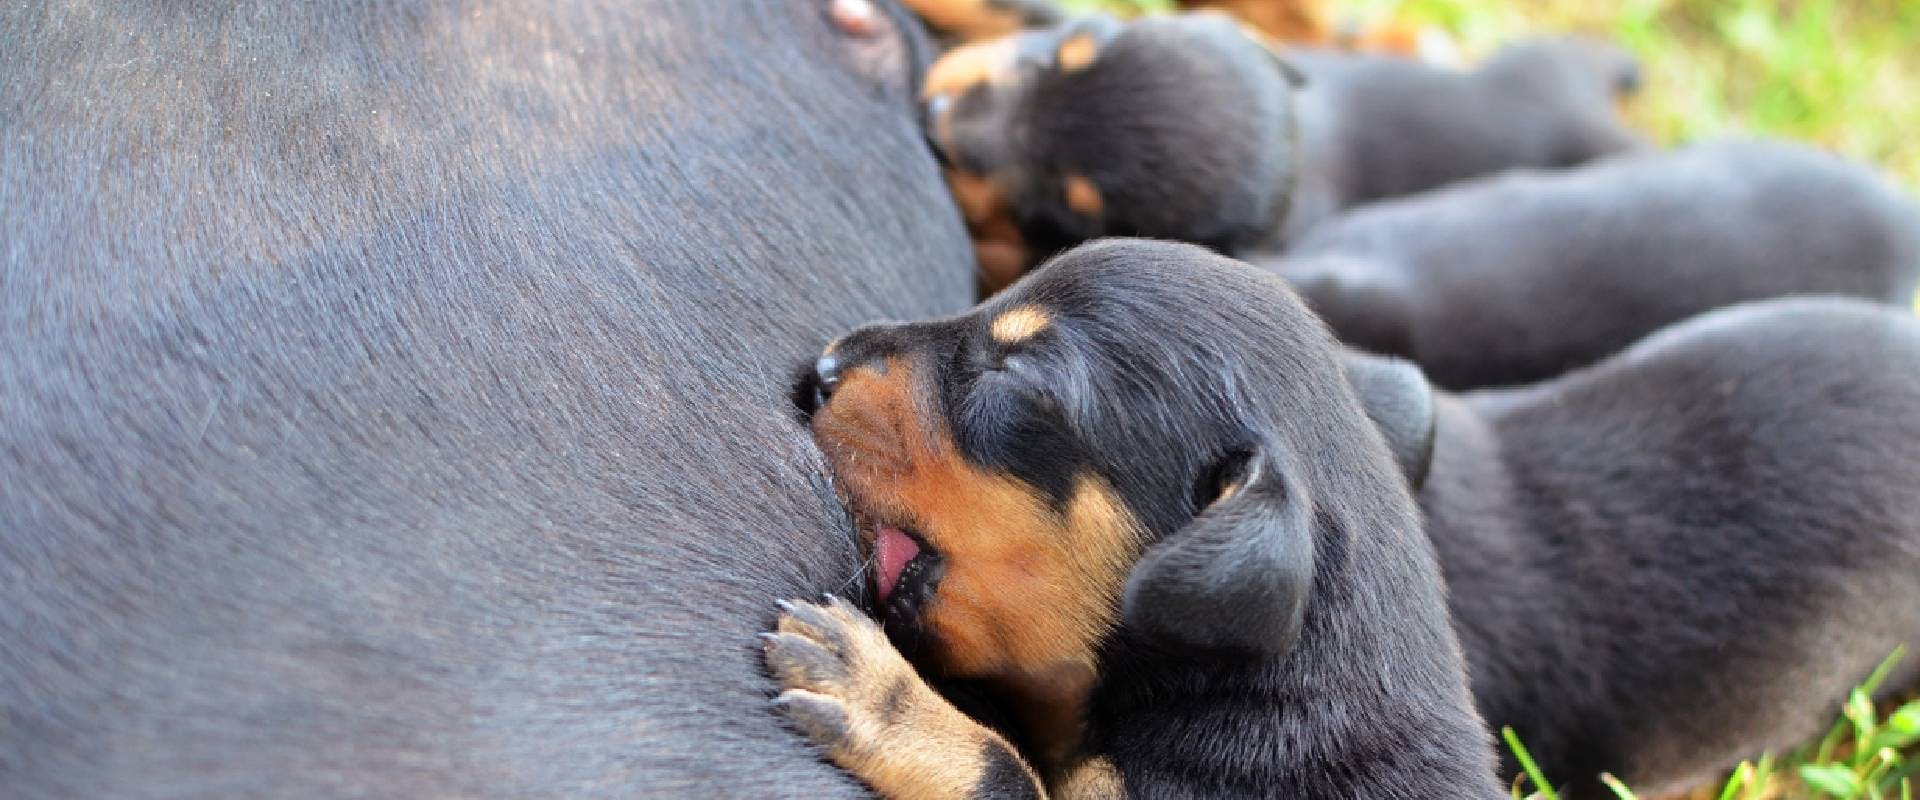 Puppies getting fed by their mother.